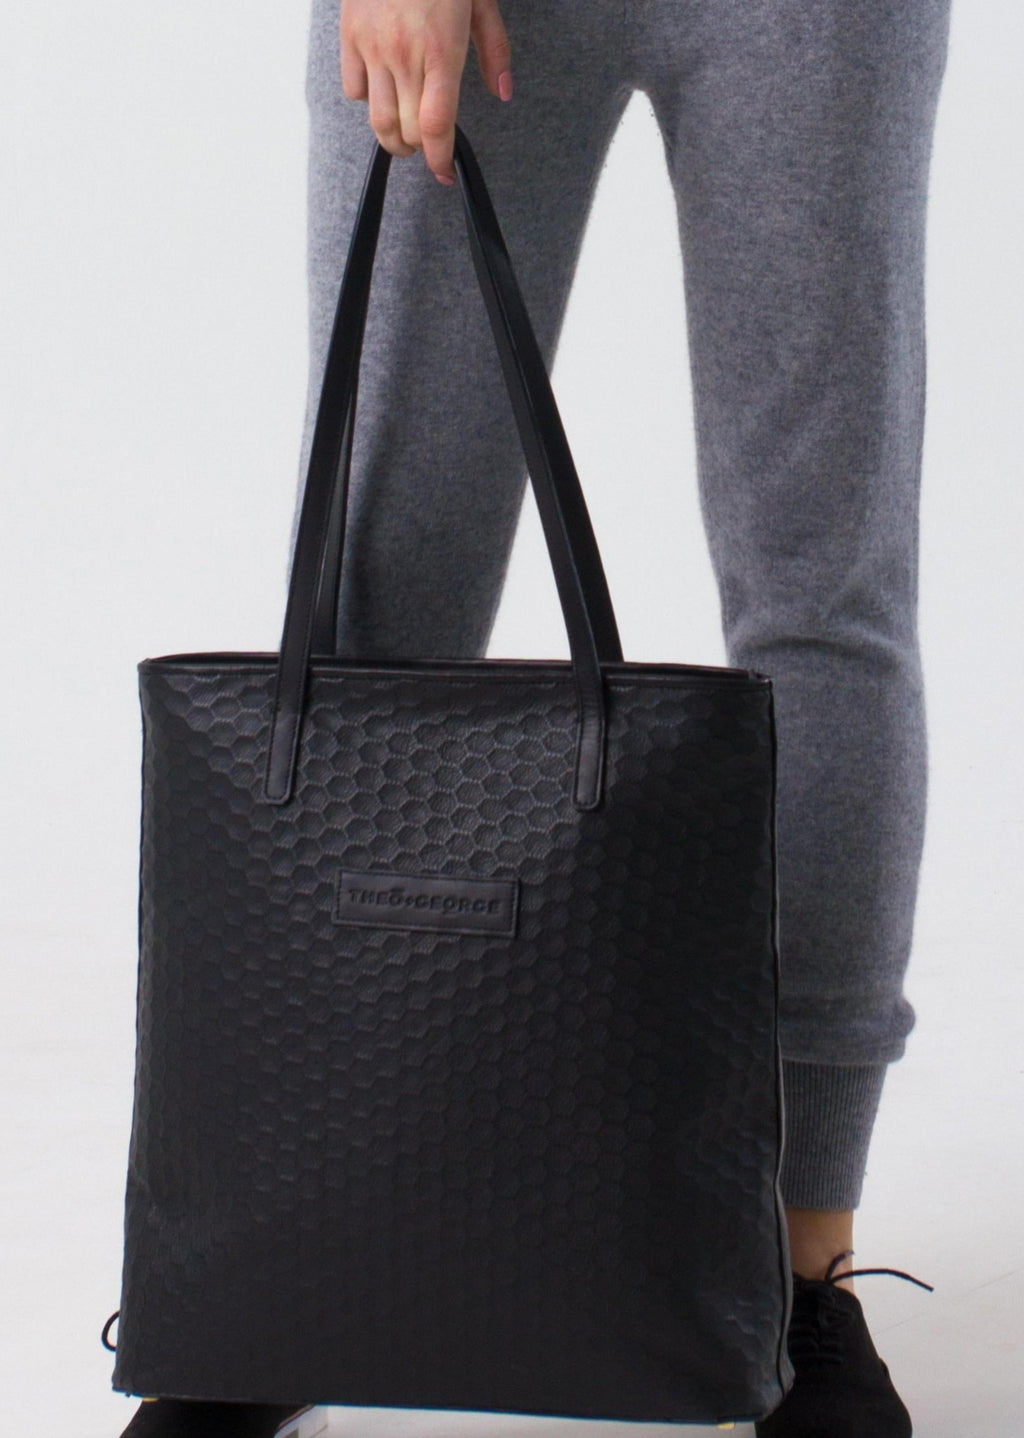 Tote Bag | Sustainable Design George George – Theo | and Theo 